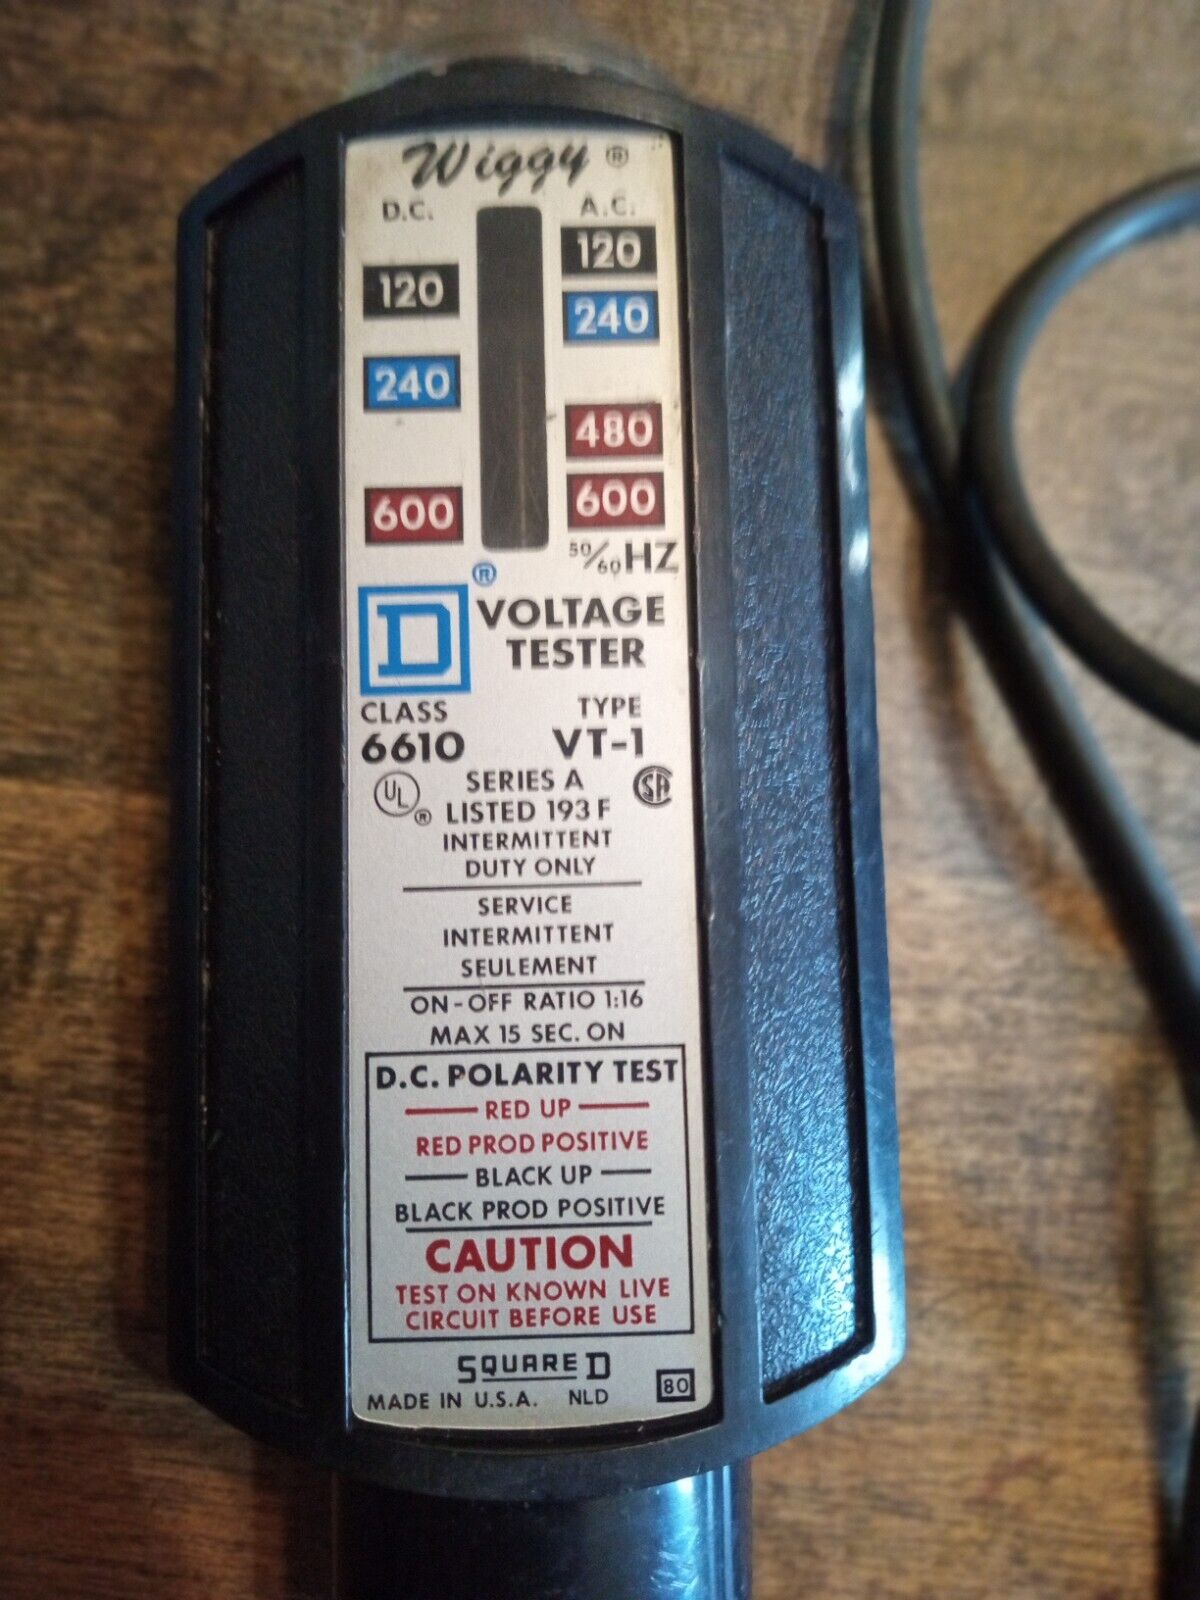 Wiggy voltage tester 6610 good condition and works as it should.